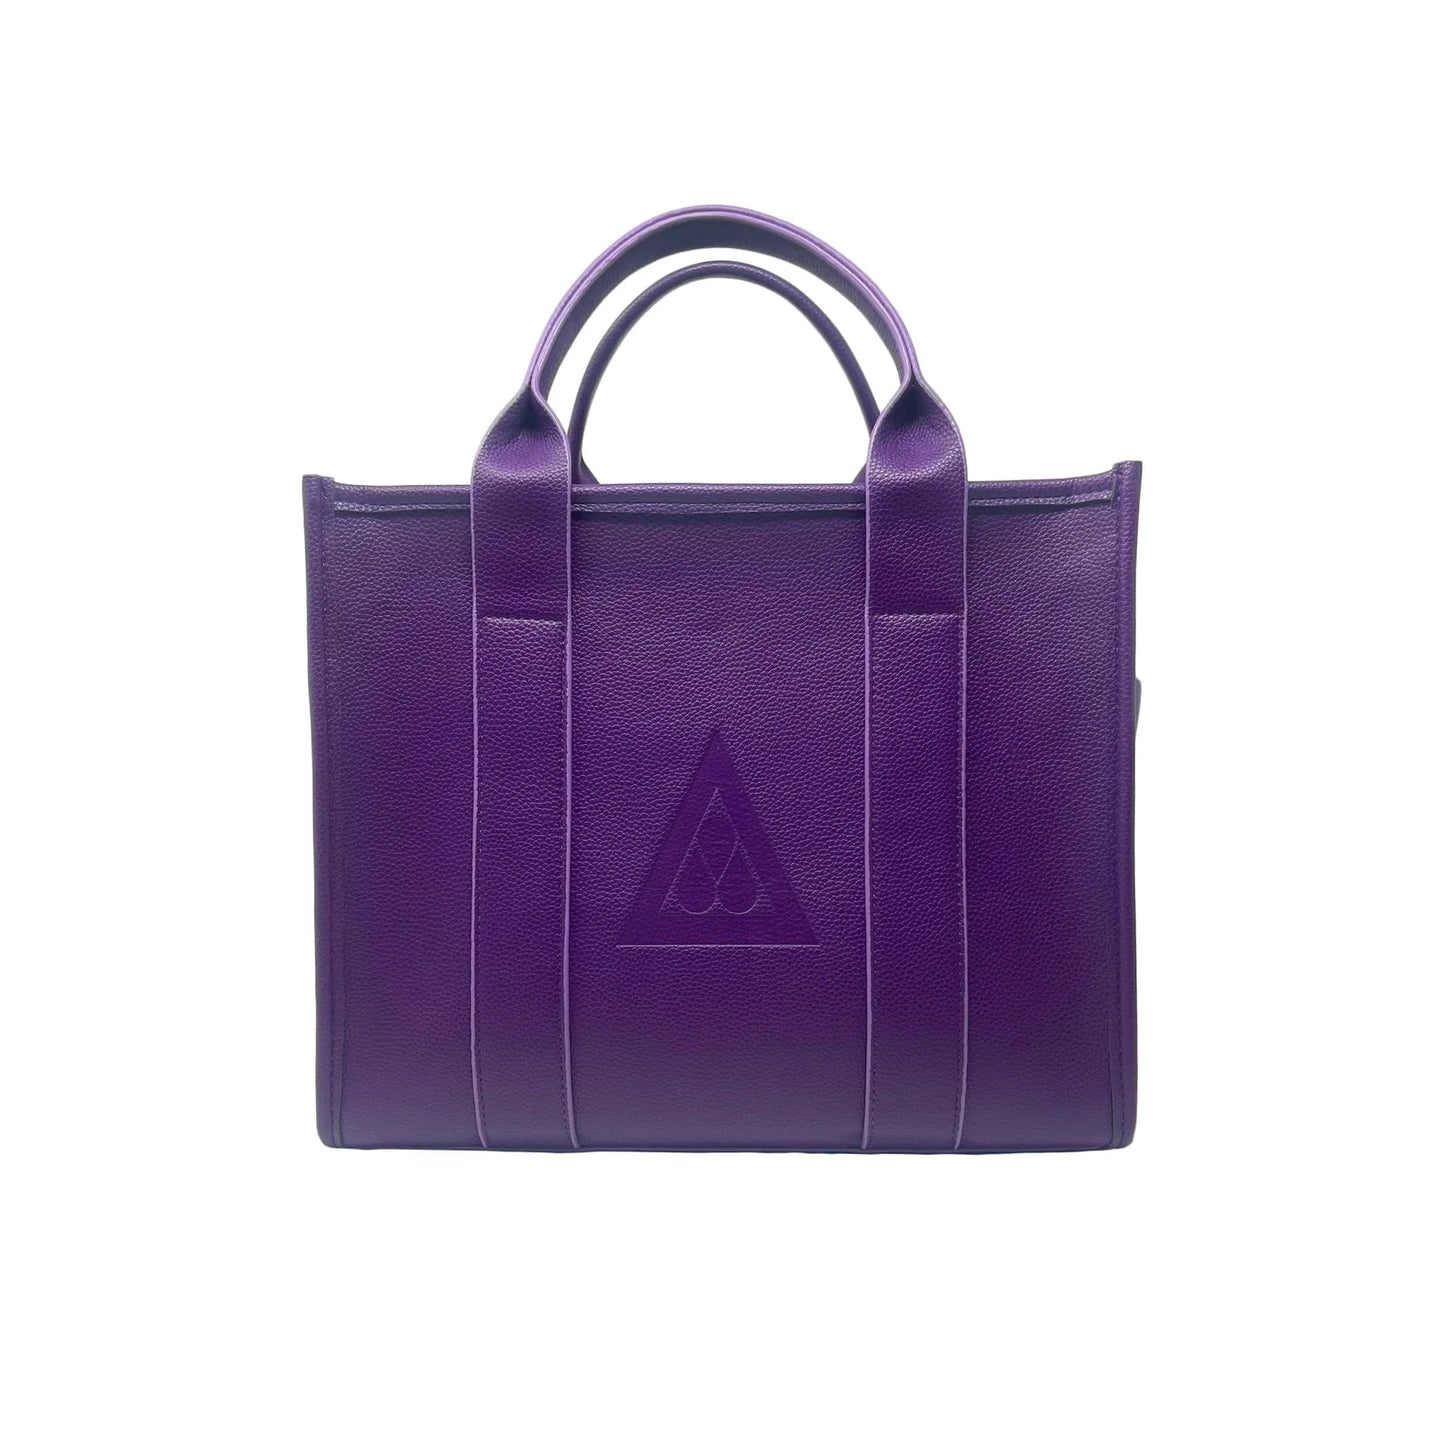 PURPLE TOTE - LEATHER (womens)